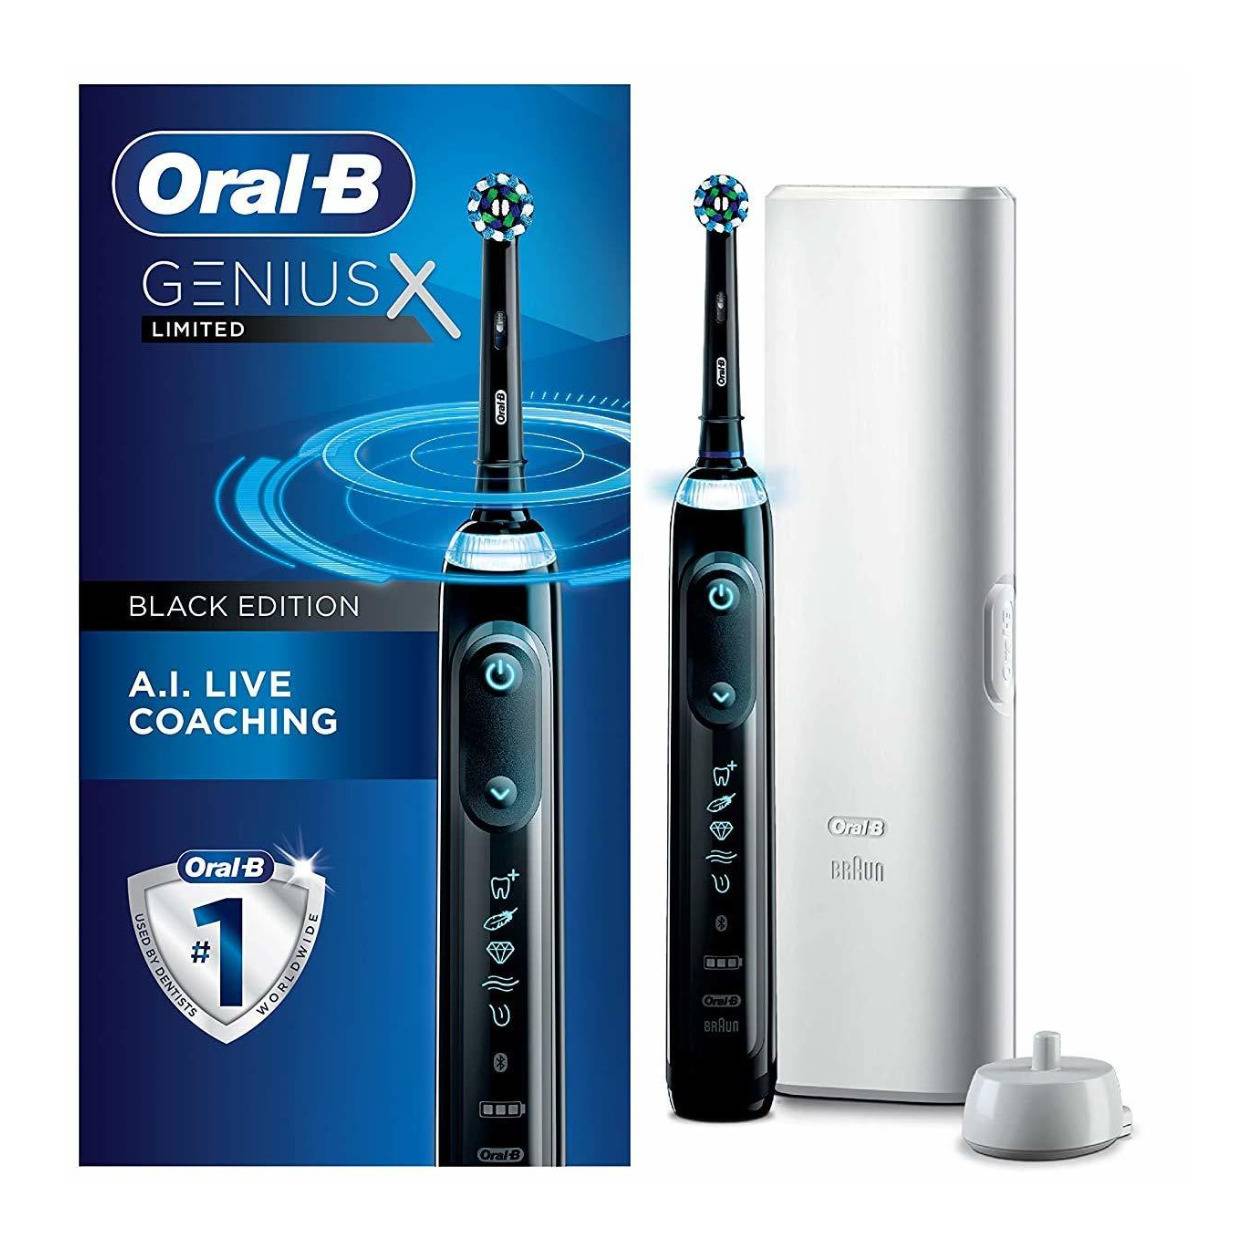 Oral-B Genius X Limited Rechargeable Electric Toothbrush with Artificial Intelligence (Midnight Black)